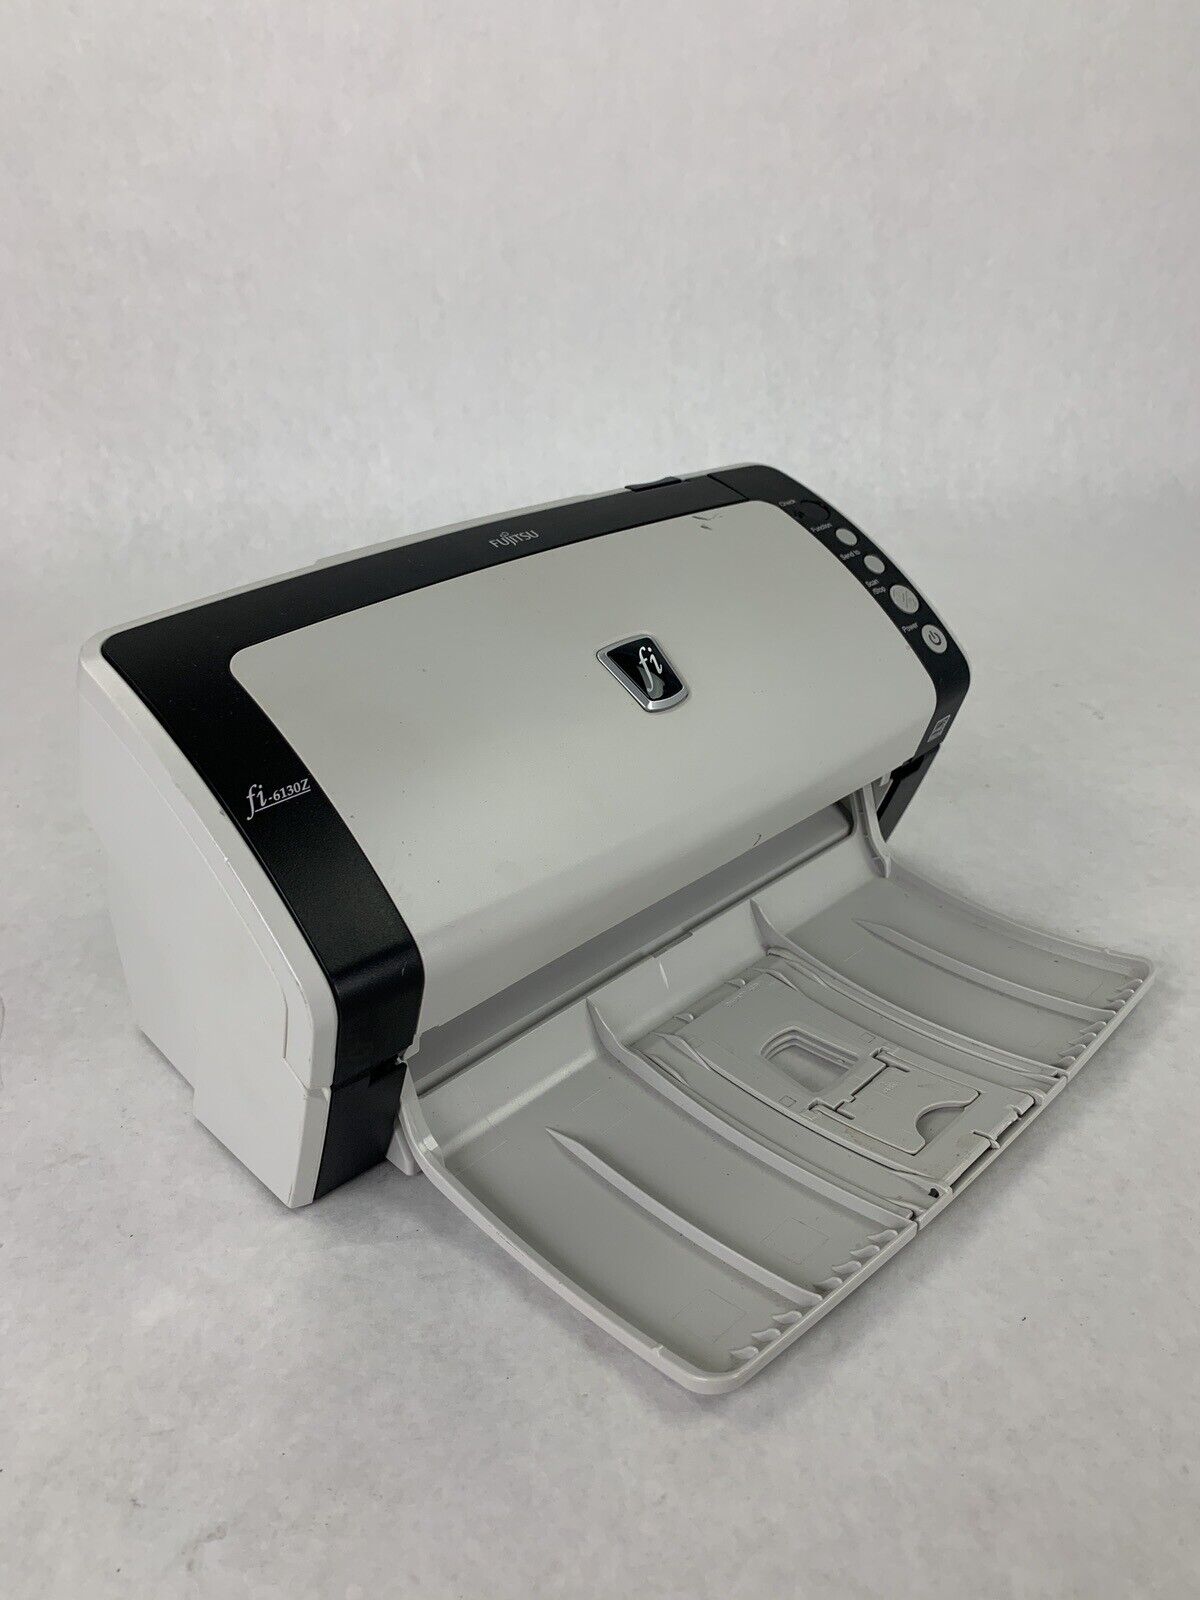 Fujitsu fi-6130z Duplex Color Scanner Tested Missing Document Holder and Catch